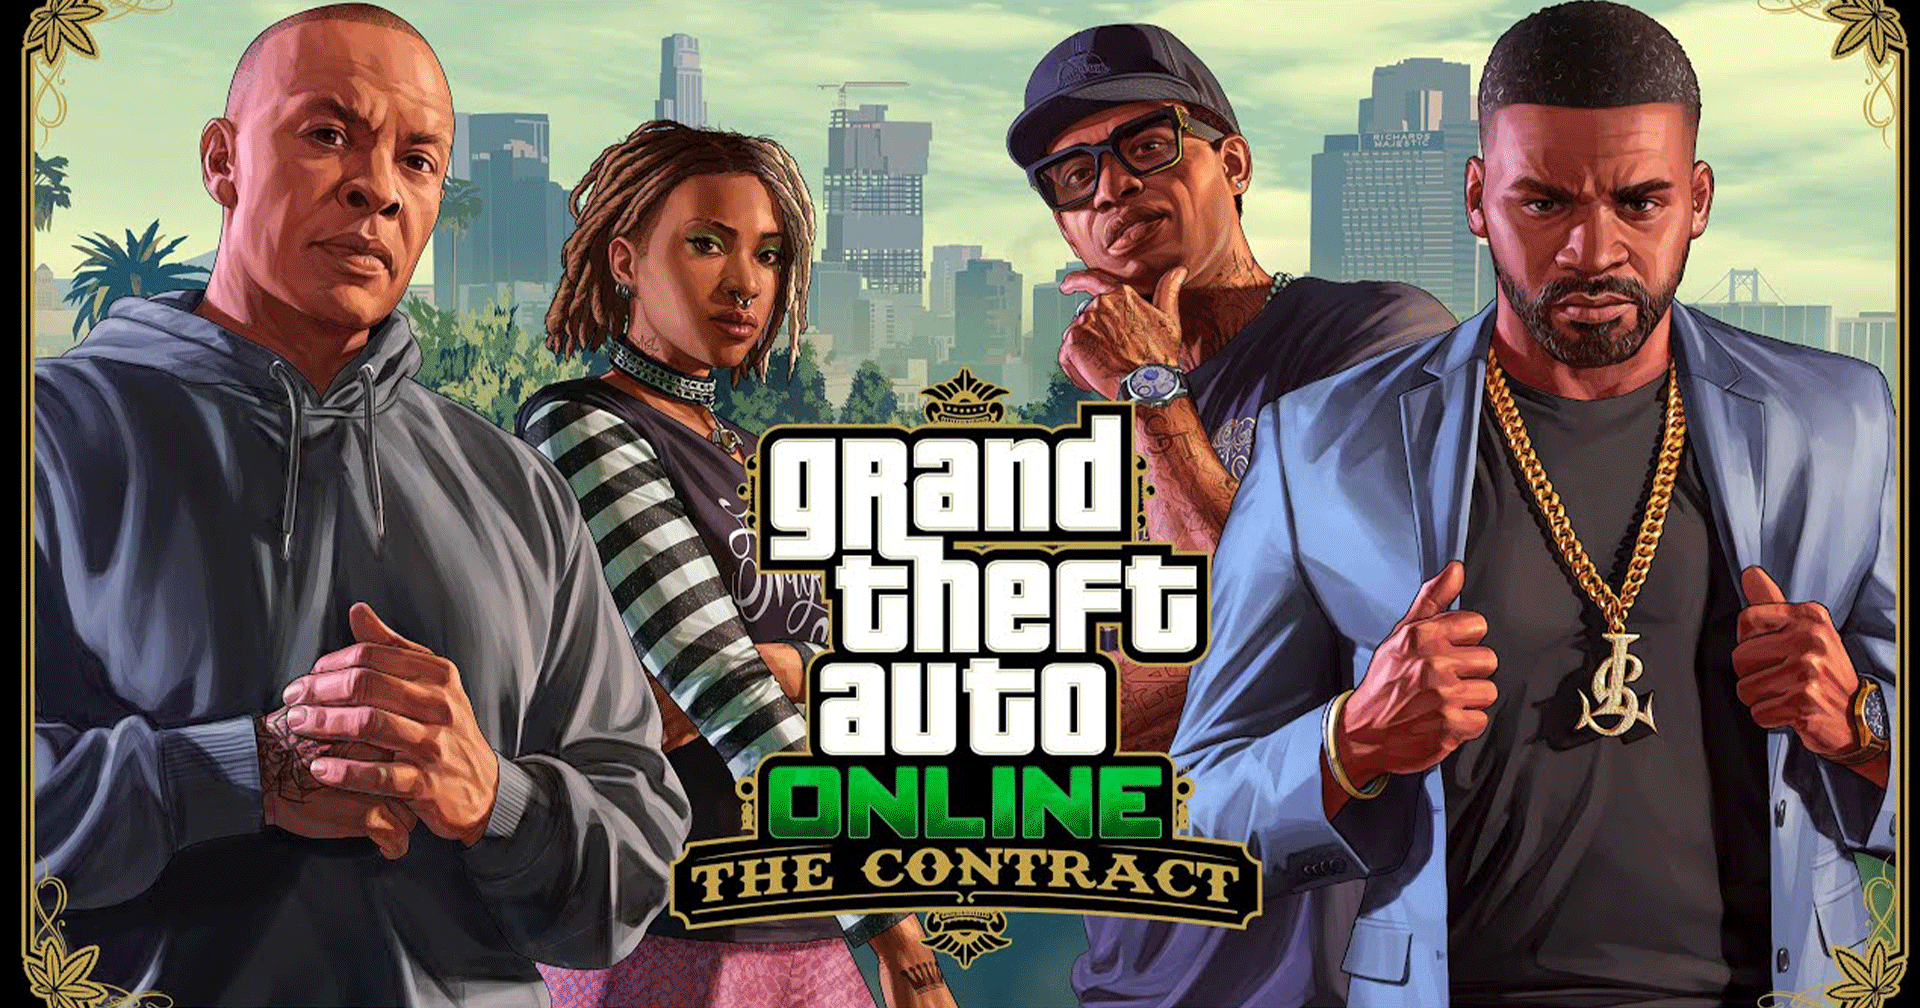 GTA Online: The Contract